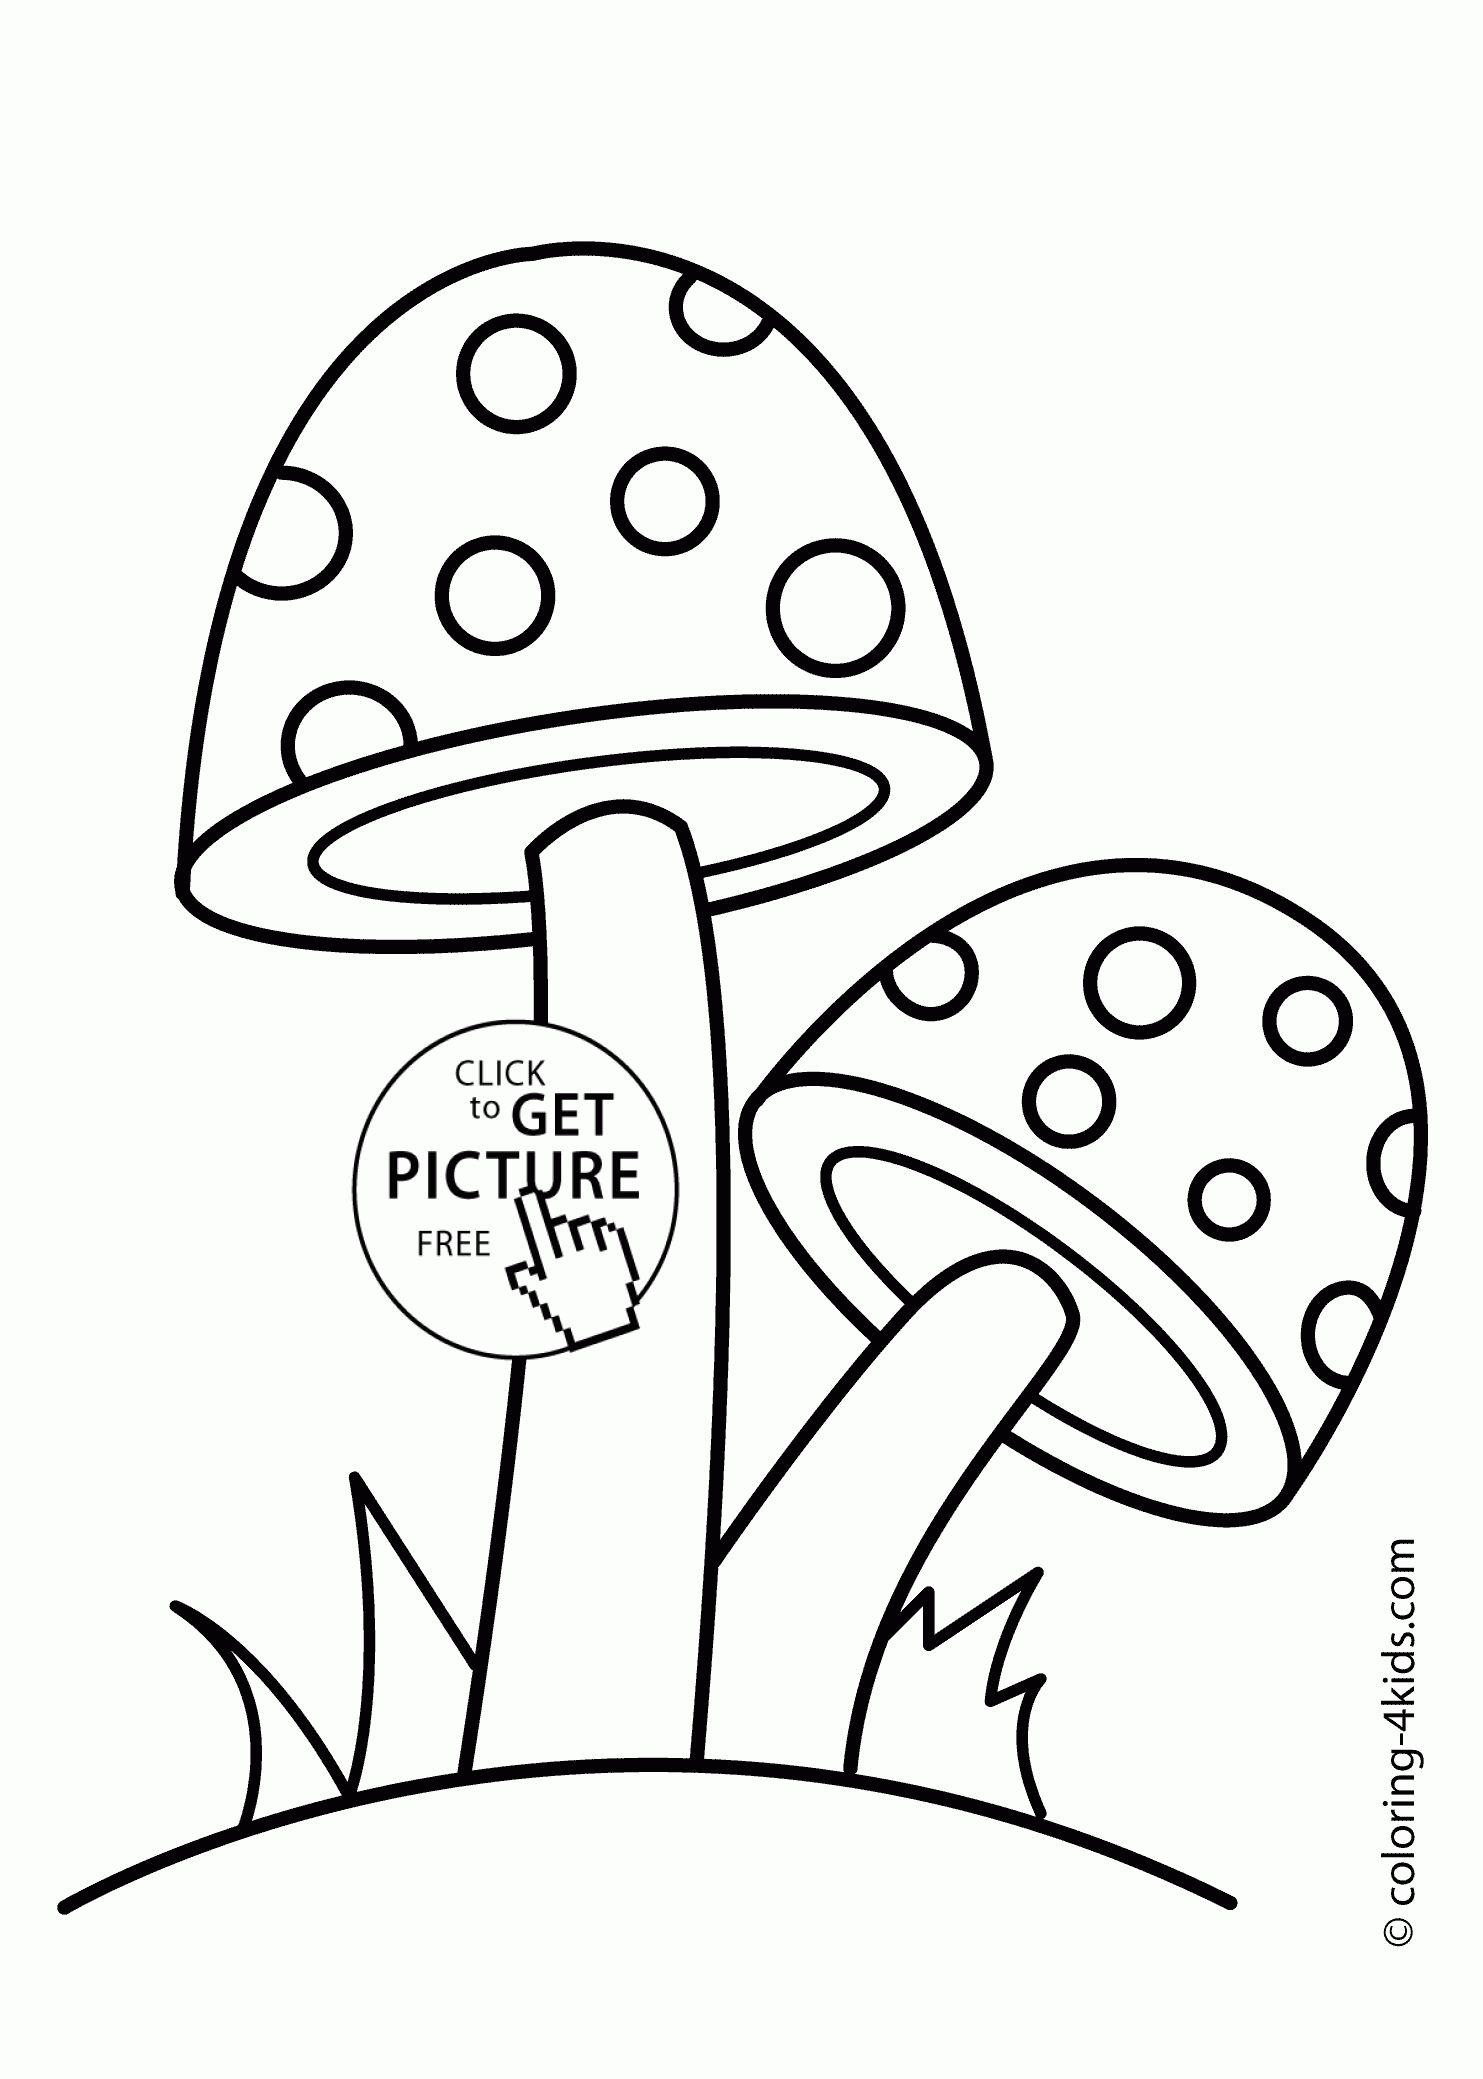 Two Mushrooms Coloring Page For Kids, Printable Free - Free Printable Mushroom Coloring Pages